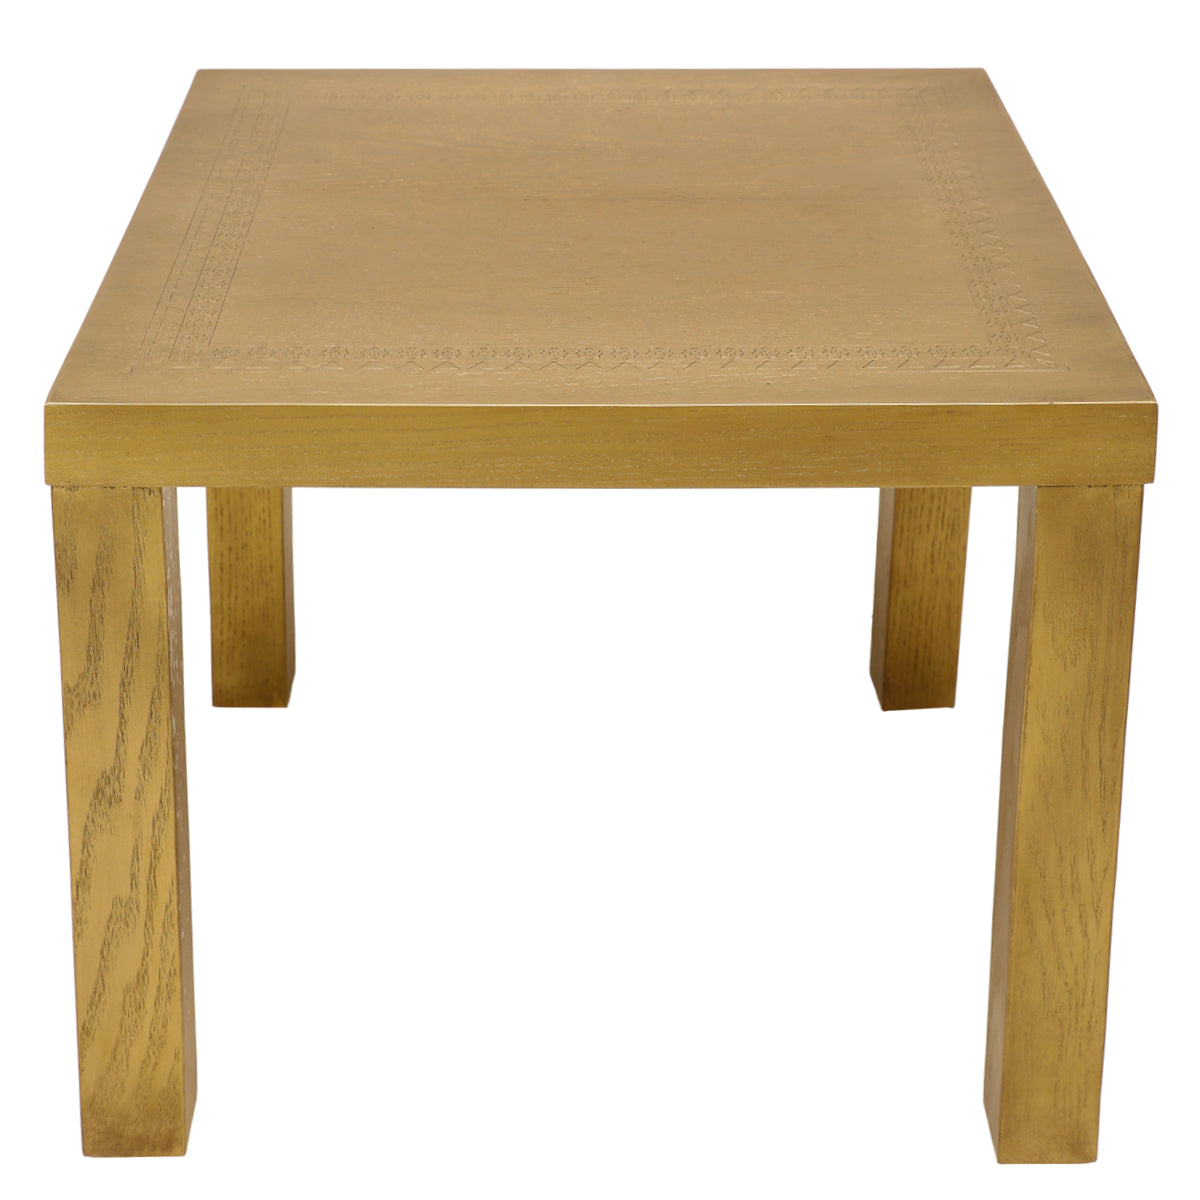 Honey Comb Side Table